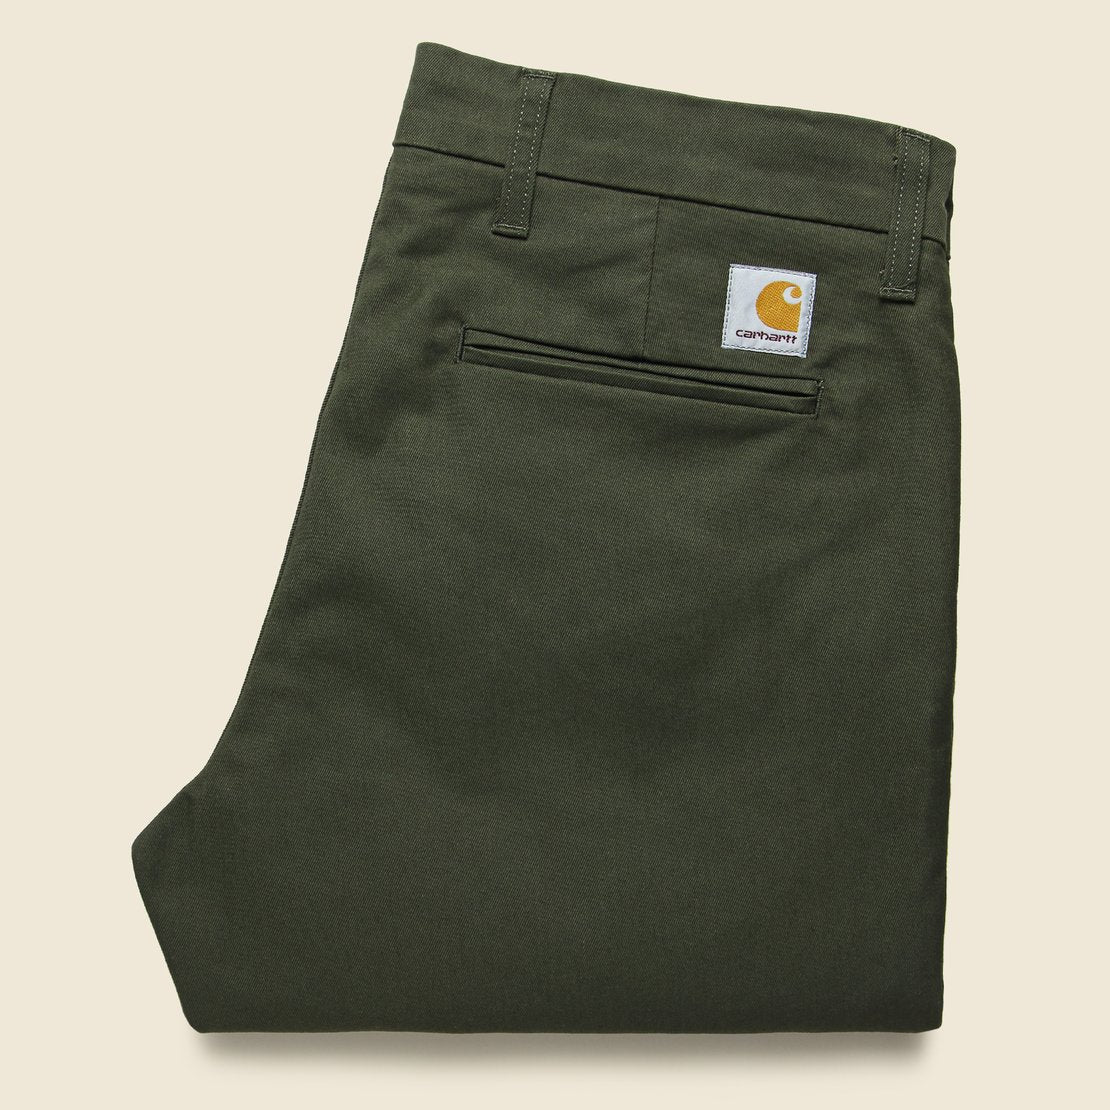 Sid Pant - Cypress - Carhartt WIP - STAG Provisions - Pants - Twill